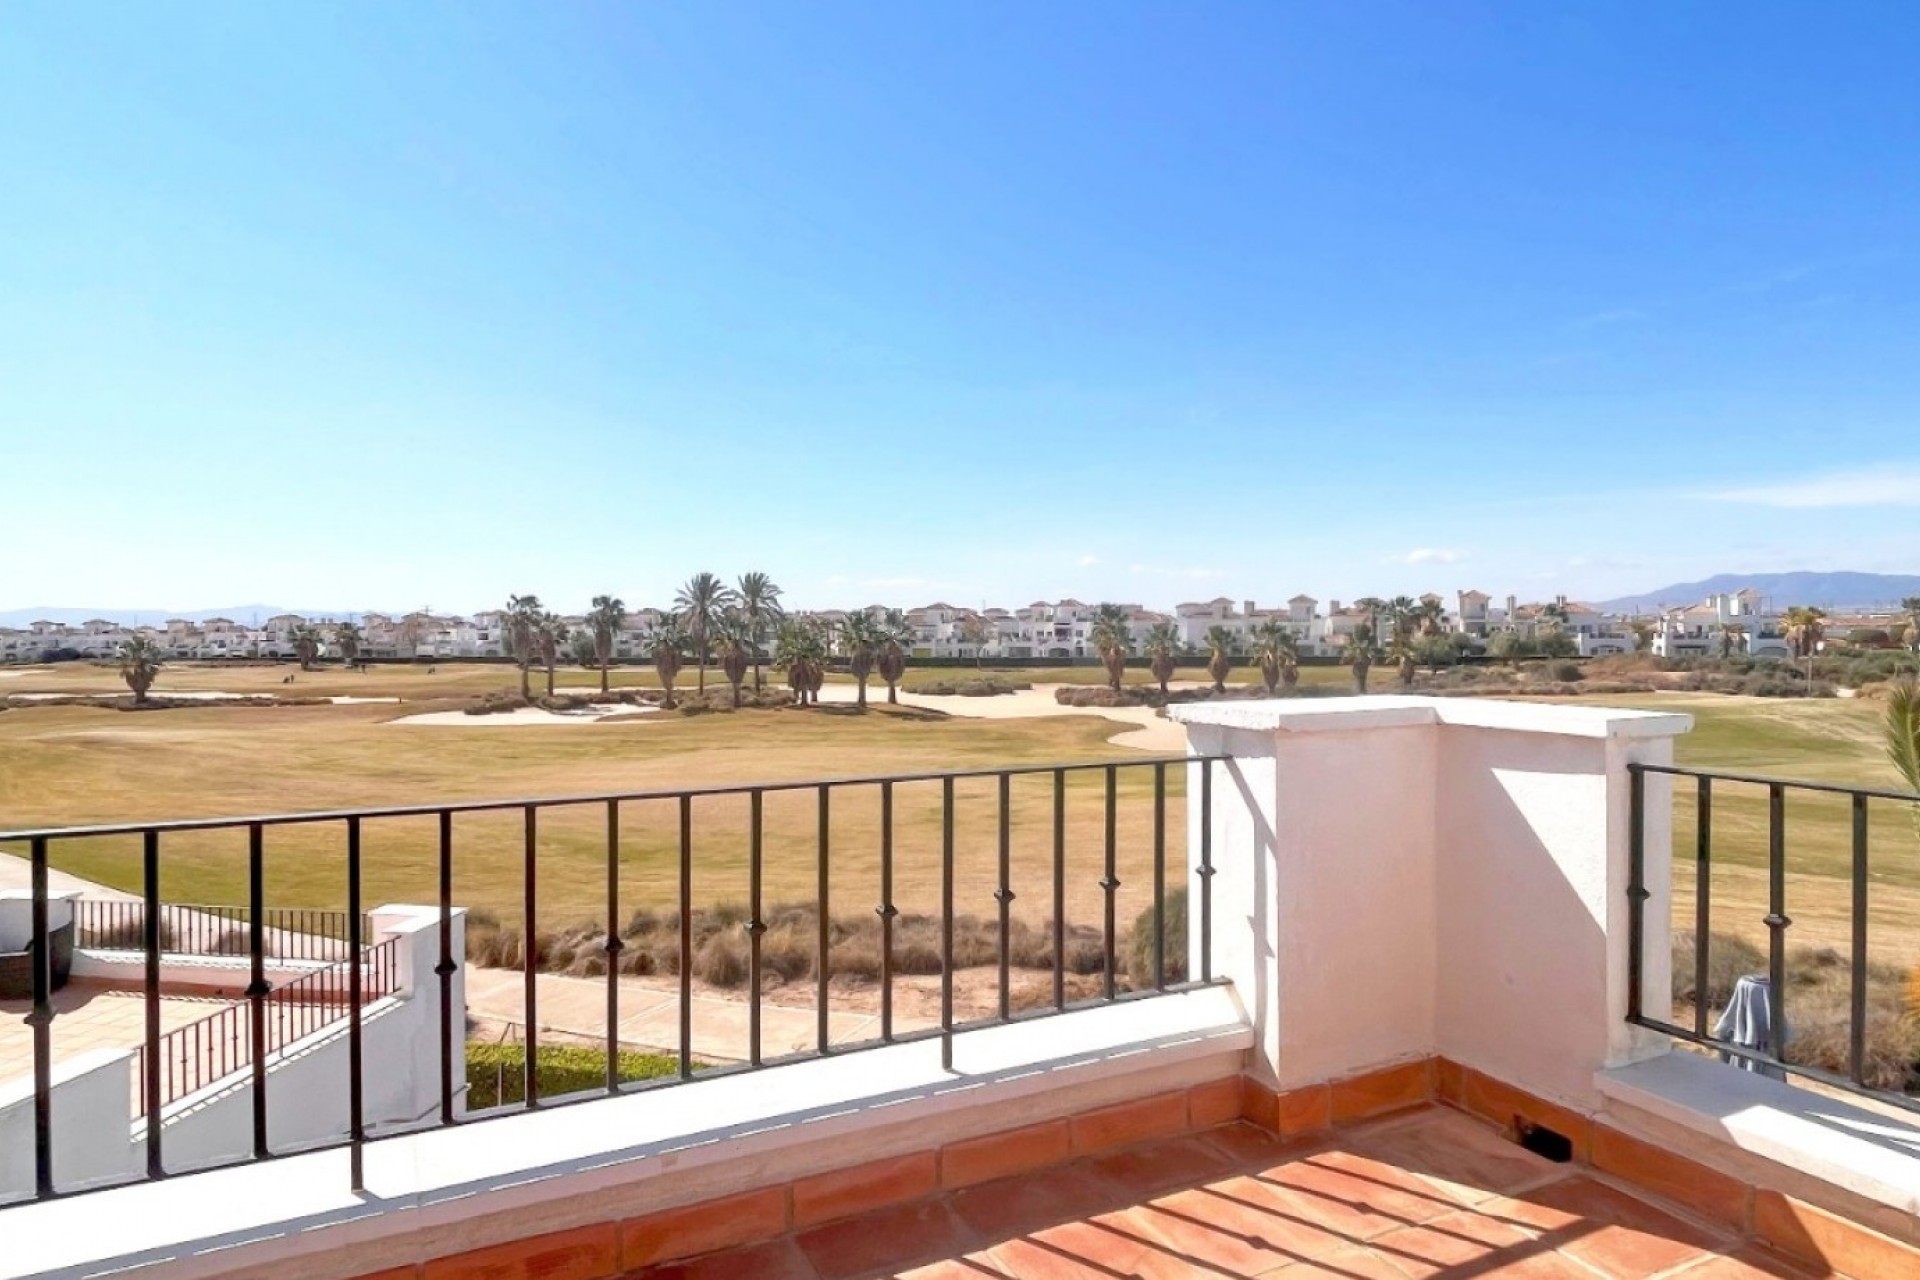 Revente - Town house -
Torre Pacheco - Inland